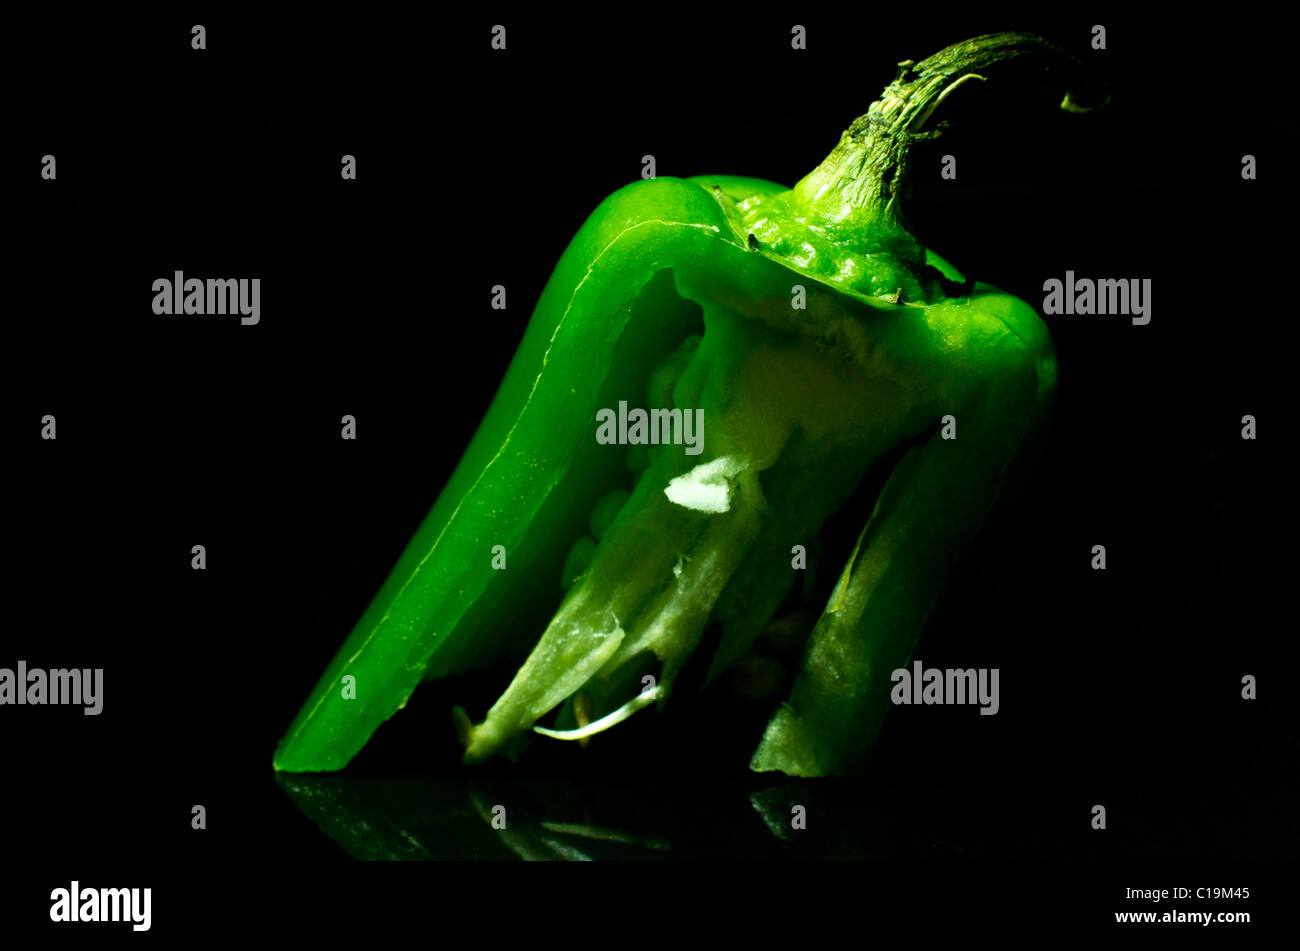 A cross-section of a jalapeno pepper, cut at an odd angle and balanced upright on a black reflective plate. Stock Photo